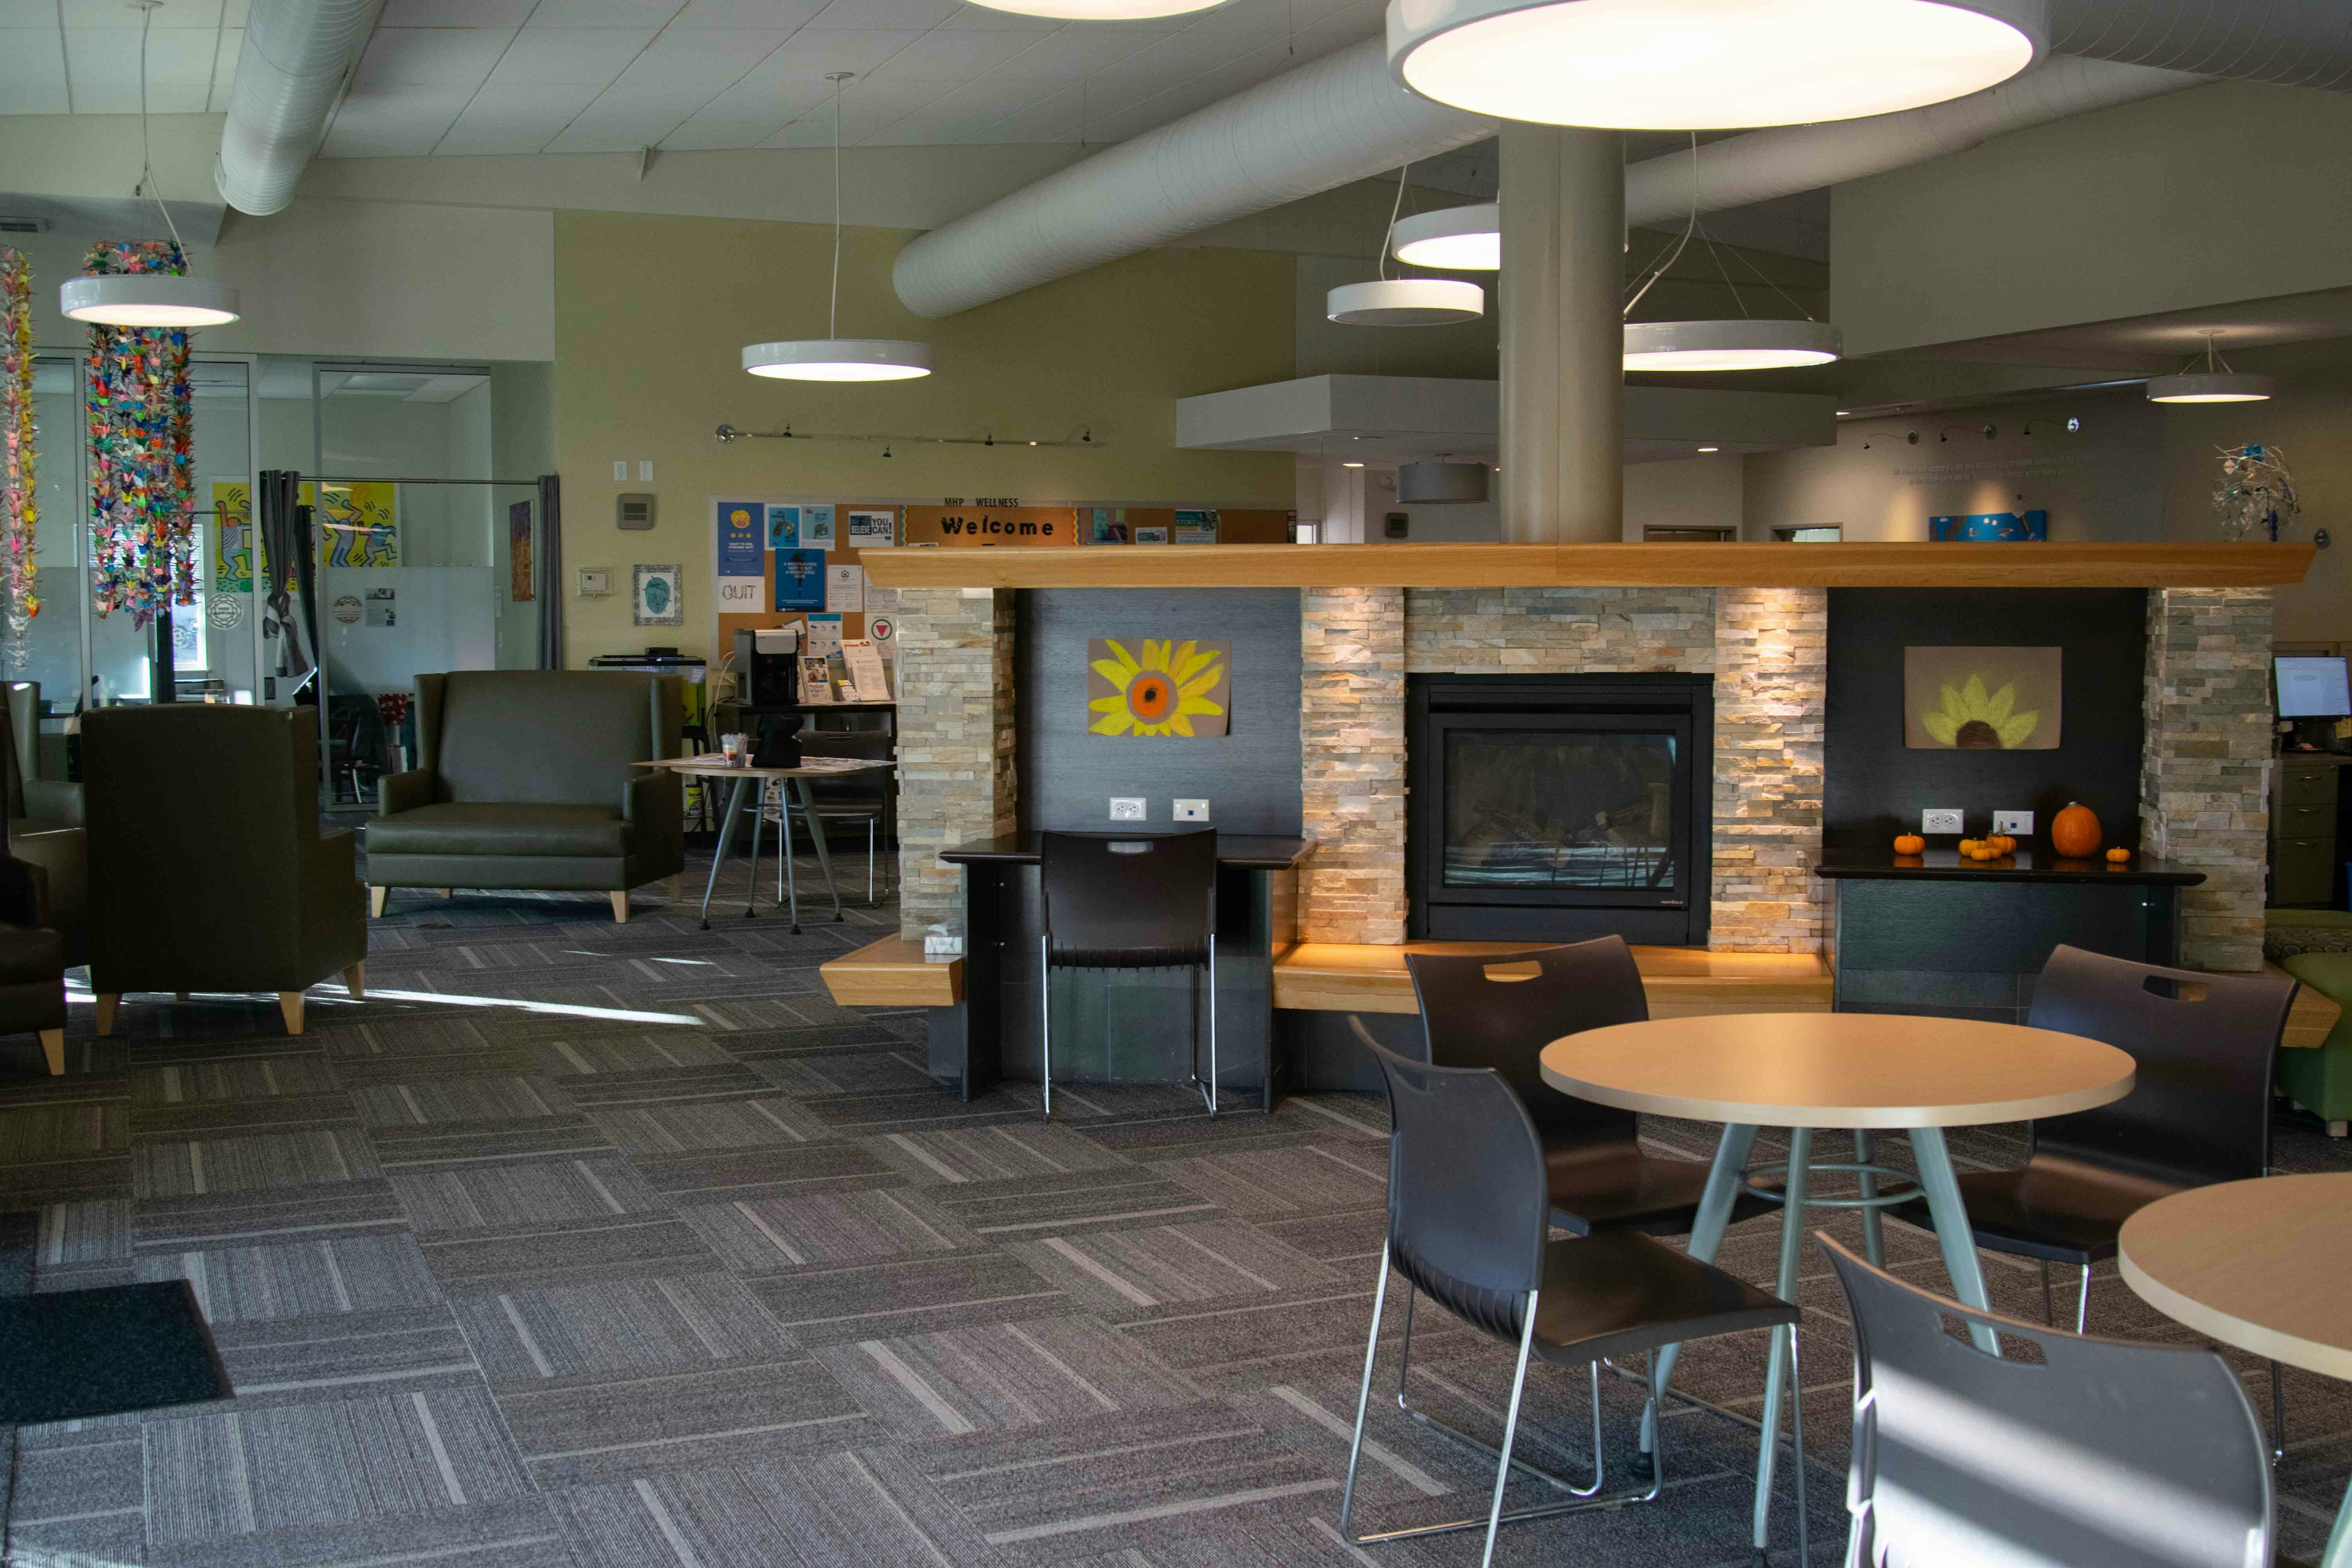 Lobby of wellness center. Tables, chairs, fireplace, and sunflower art work.